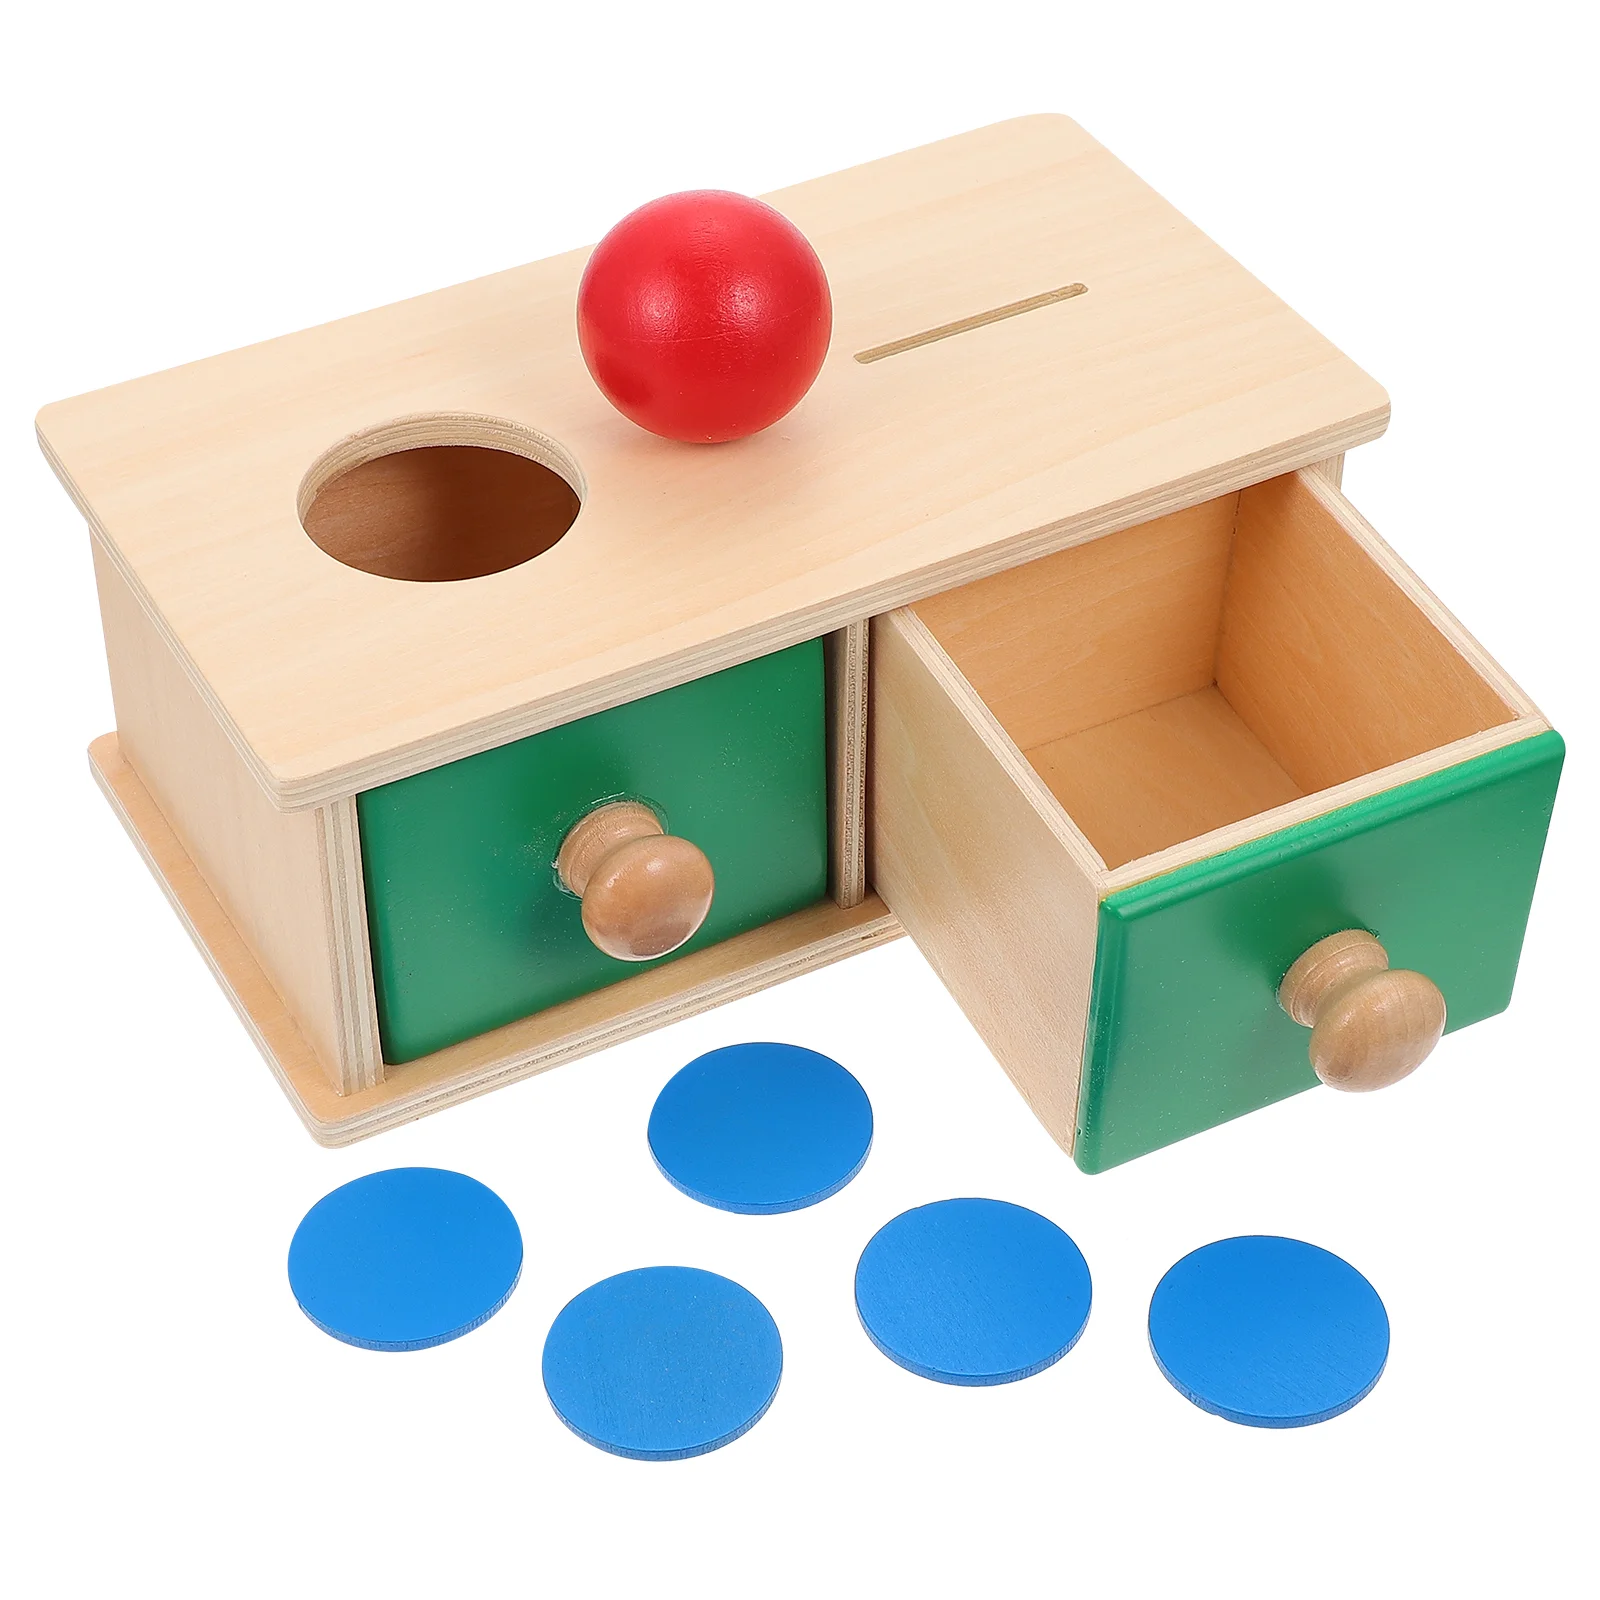 

Drawer Target Box Educational Playthings Baby Toys Montessori Teaching Aids Meaningful Toddler Wooden Cognitive Children